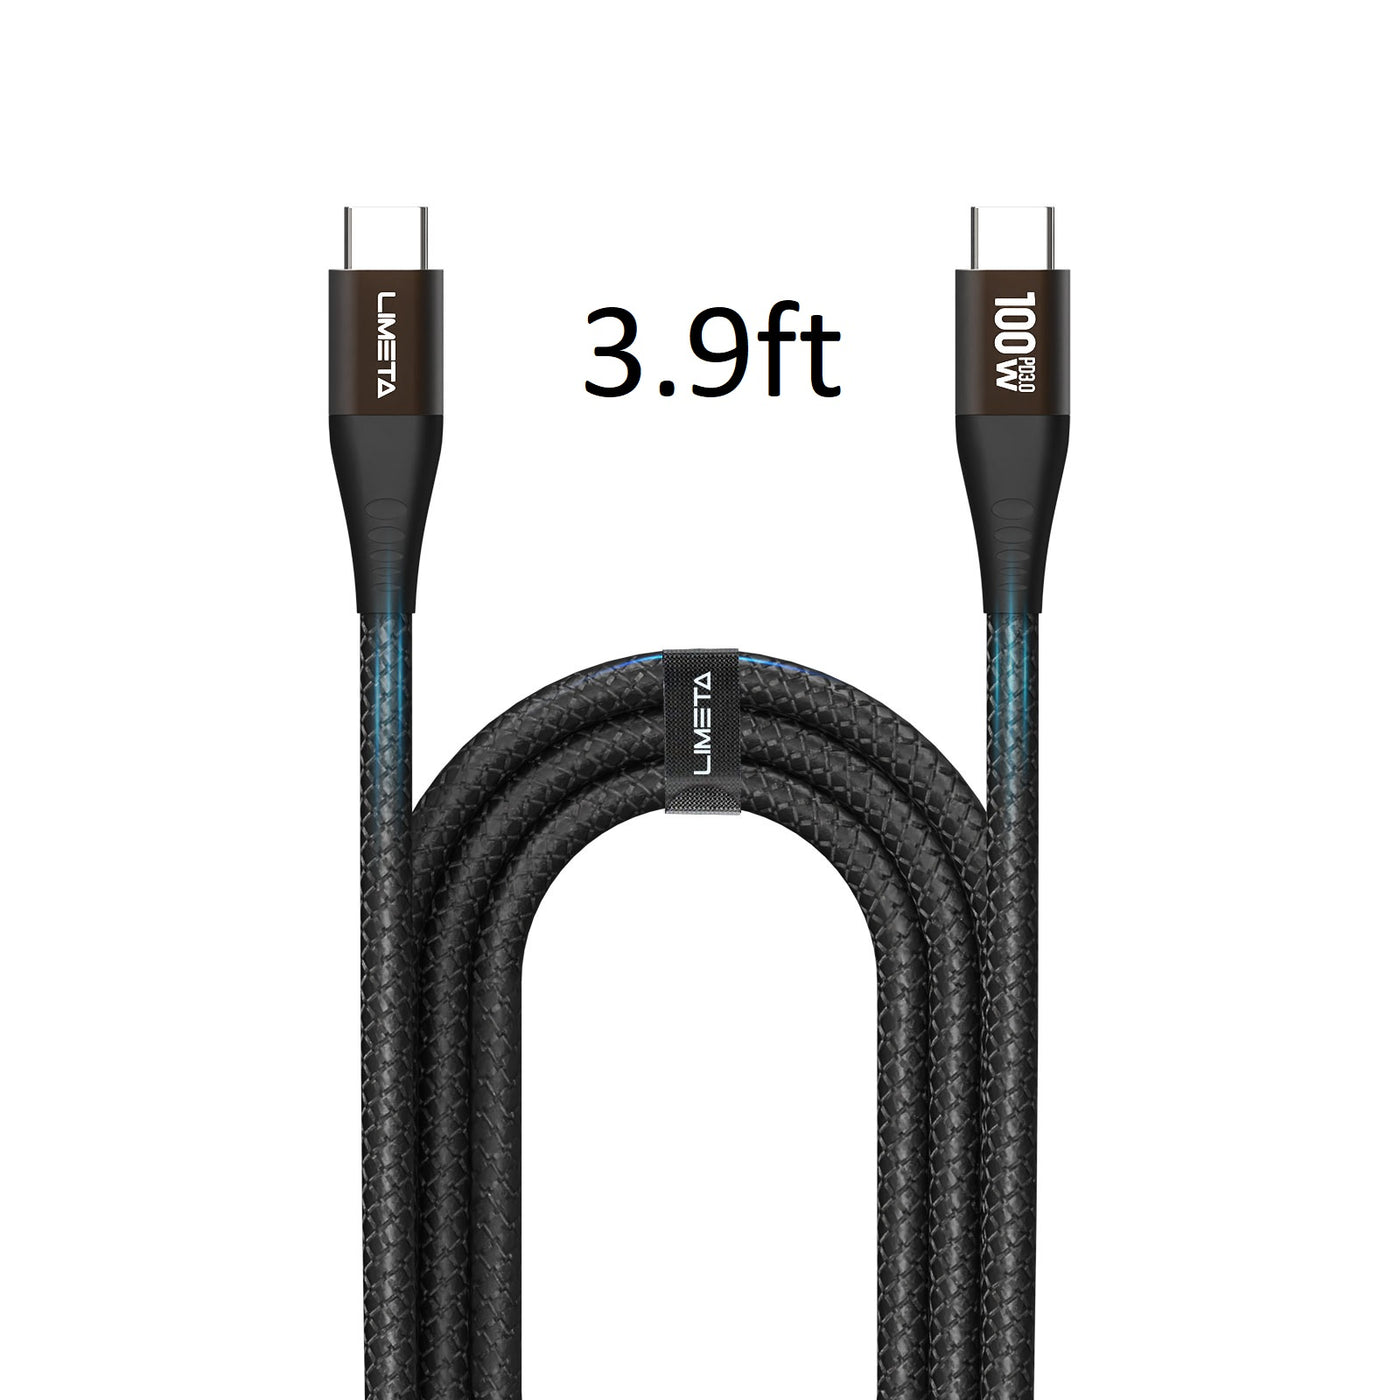 LIMETA 100W USB C to C Cable - Fast Charging & Data Transfer for MacBook, iPad Pro, Galaxy S21, Pixel, Nintendo Switch - Nylon Braided - PD 3.0 & Type C Compatible (3.9ft/6.6ft)